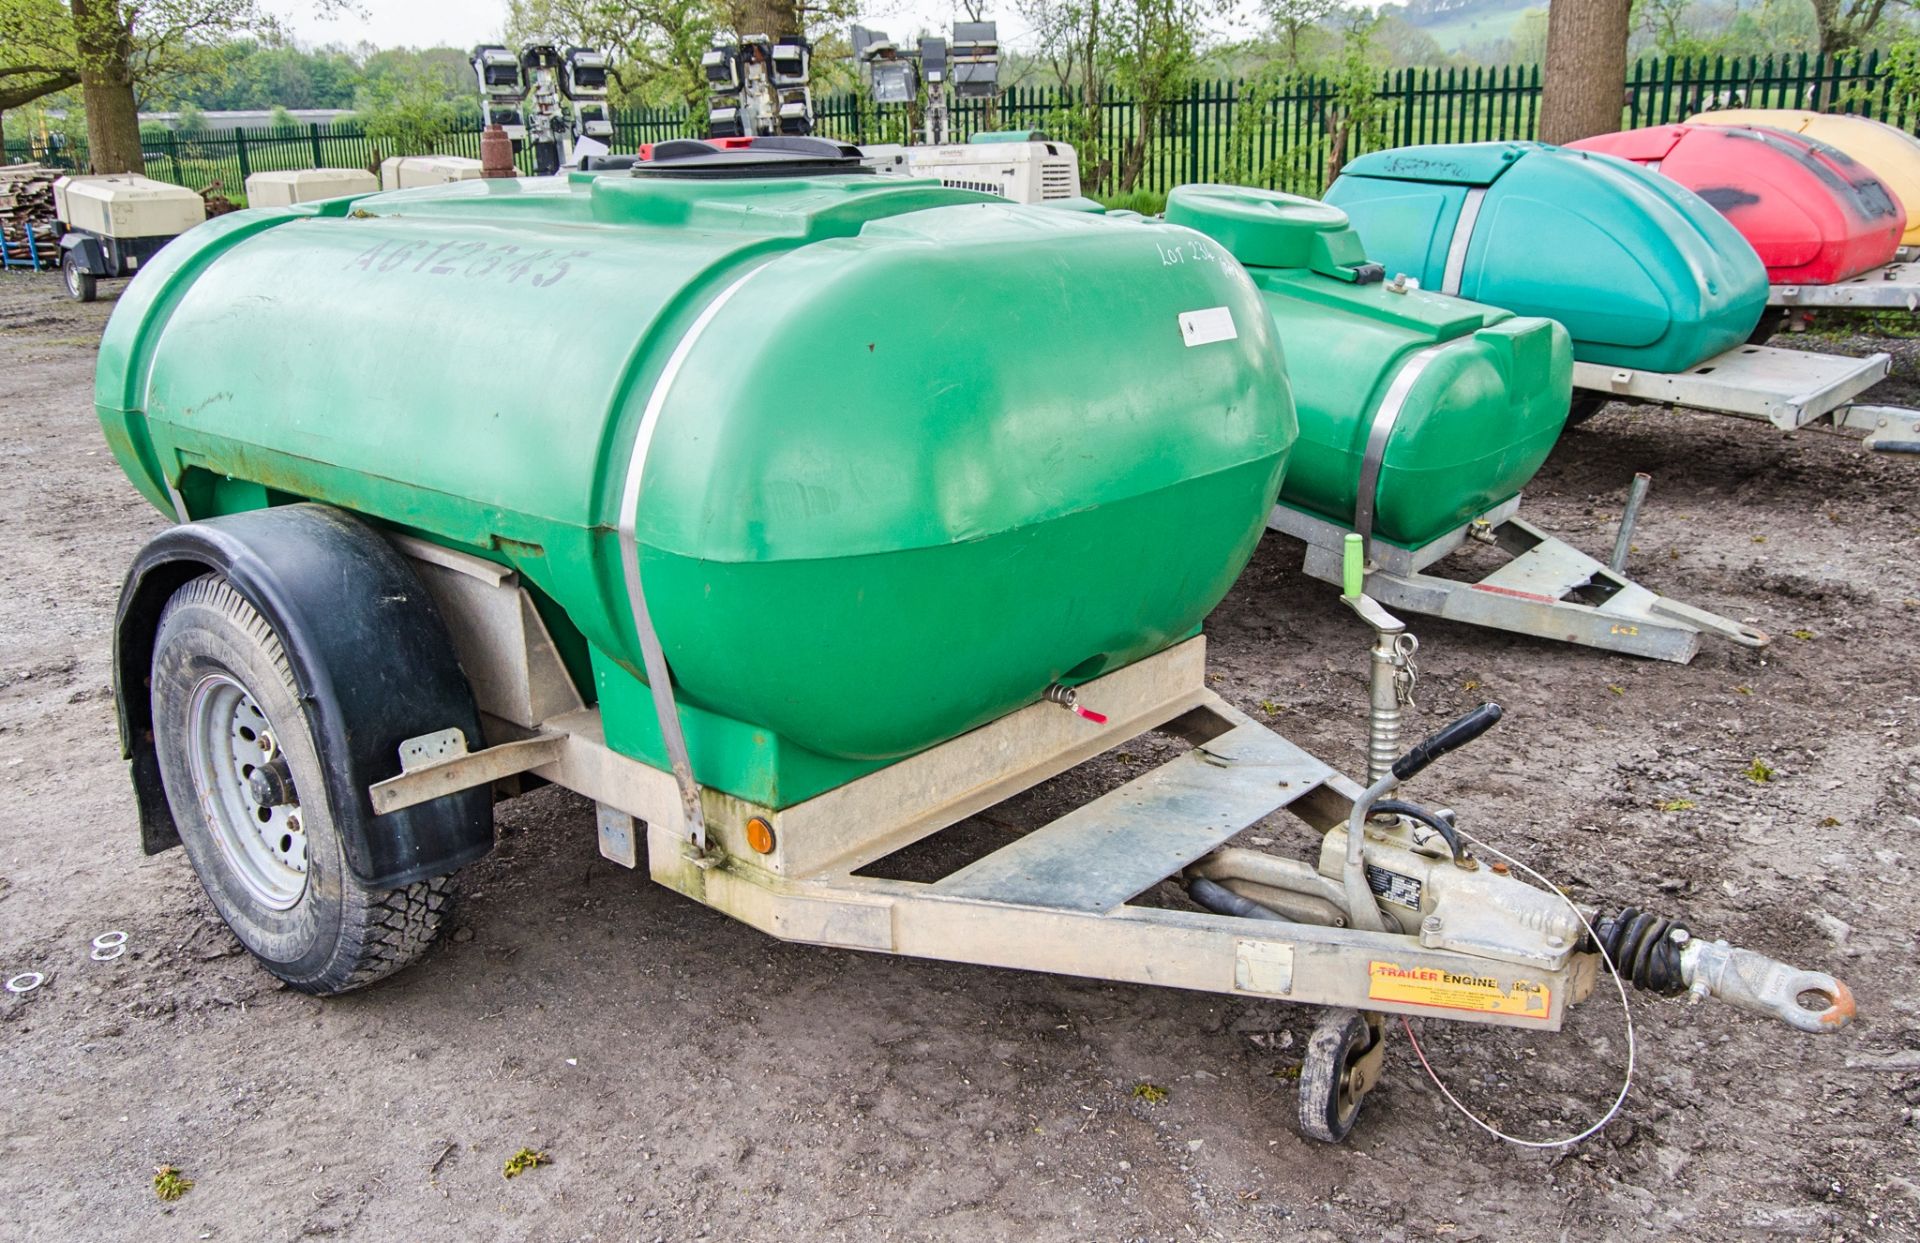 Trailer Engineering 2000 litre fast tow mobile water bowser A612645 - Image 2 of 6